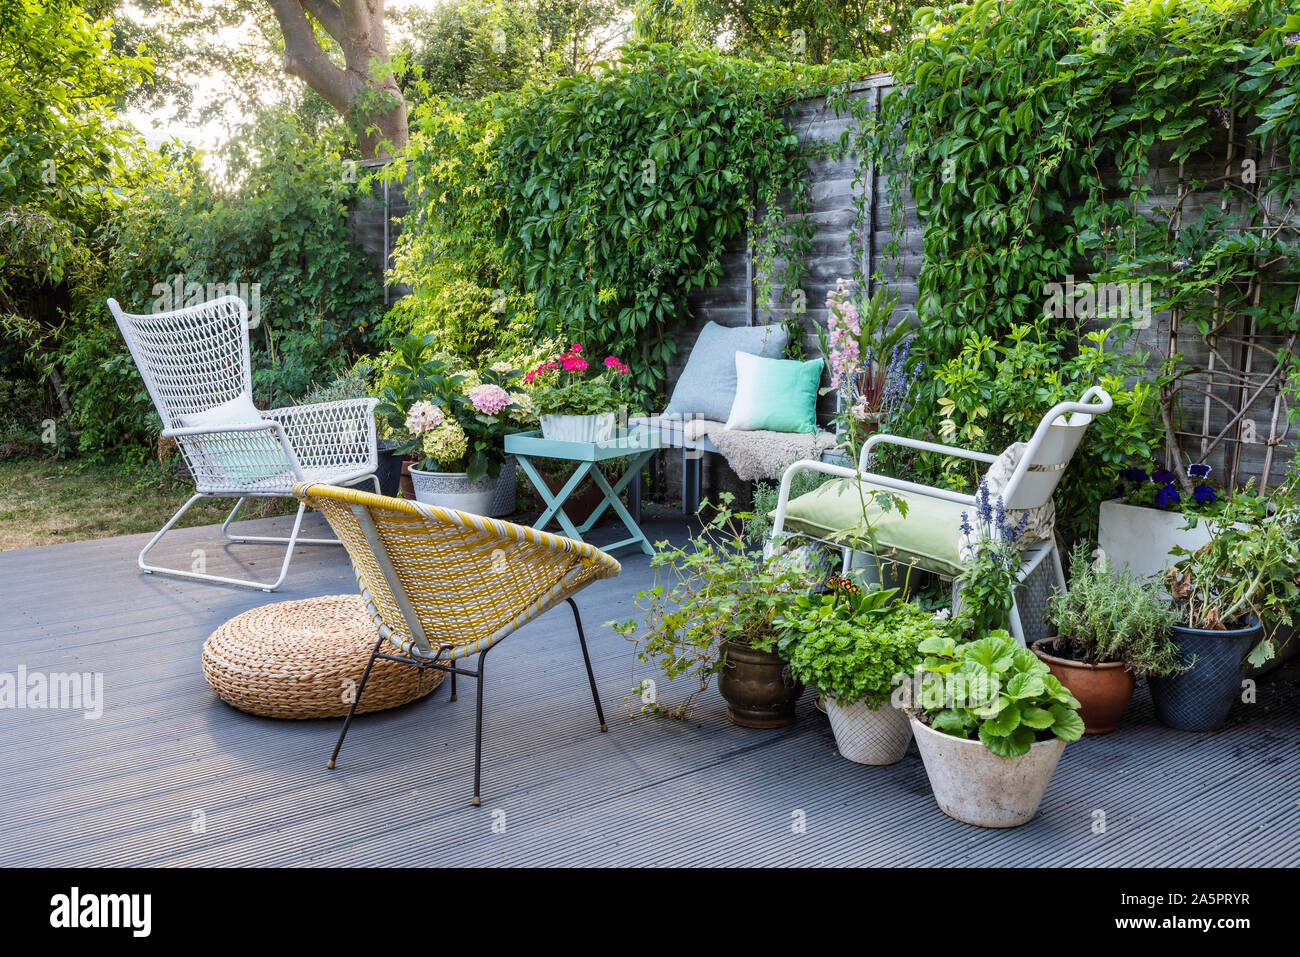 Garden furniture on decking with pot plants Stock Photo